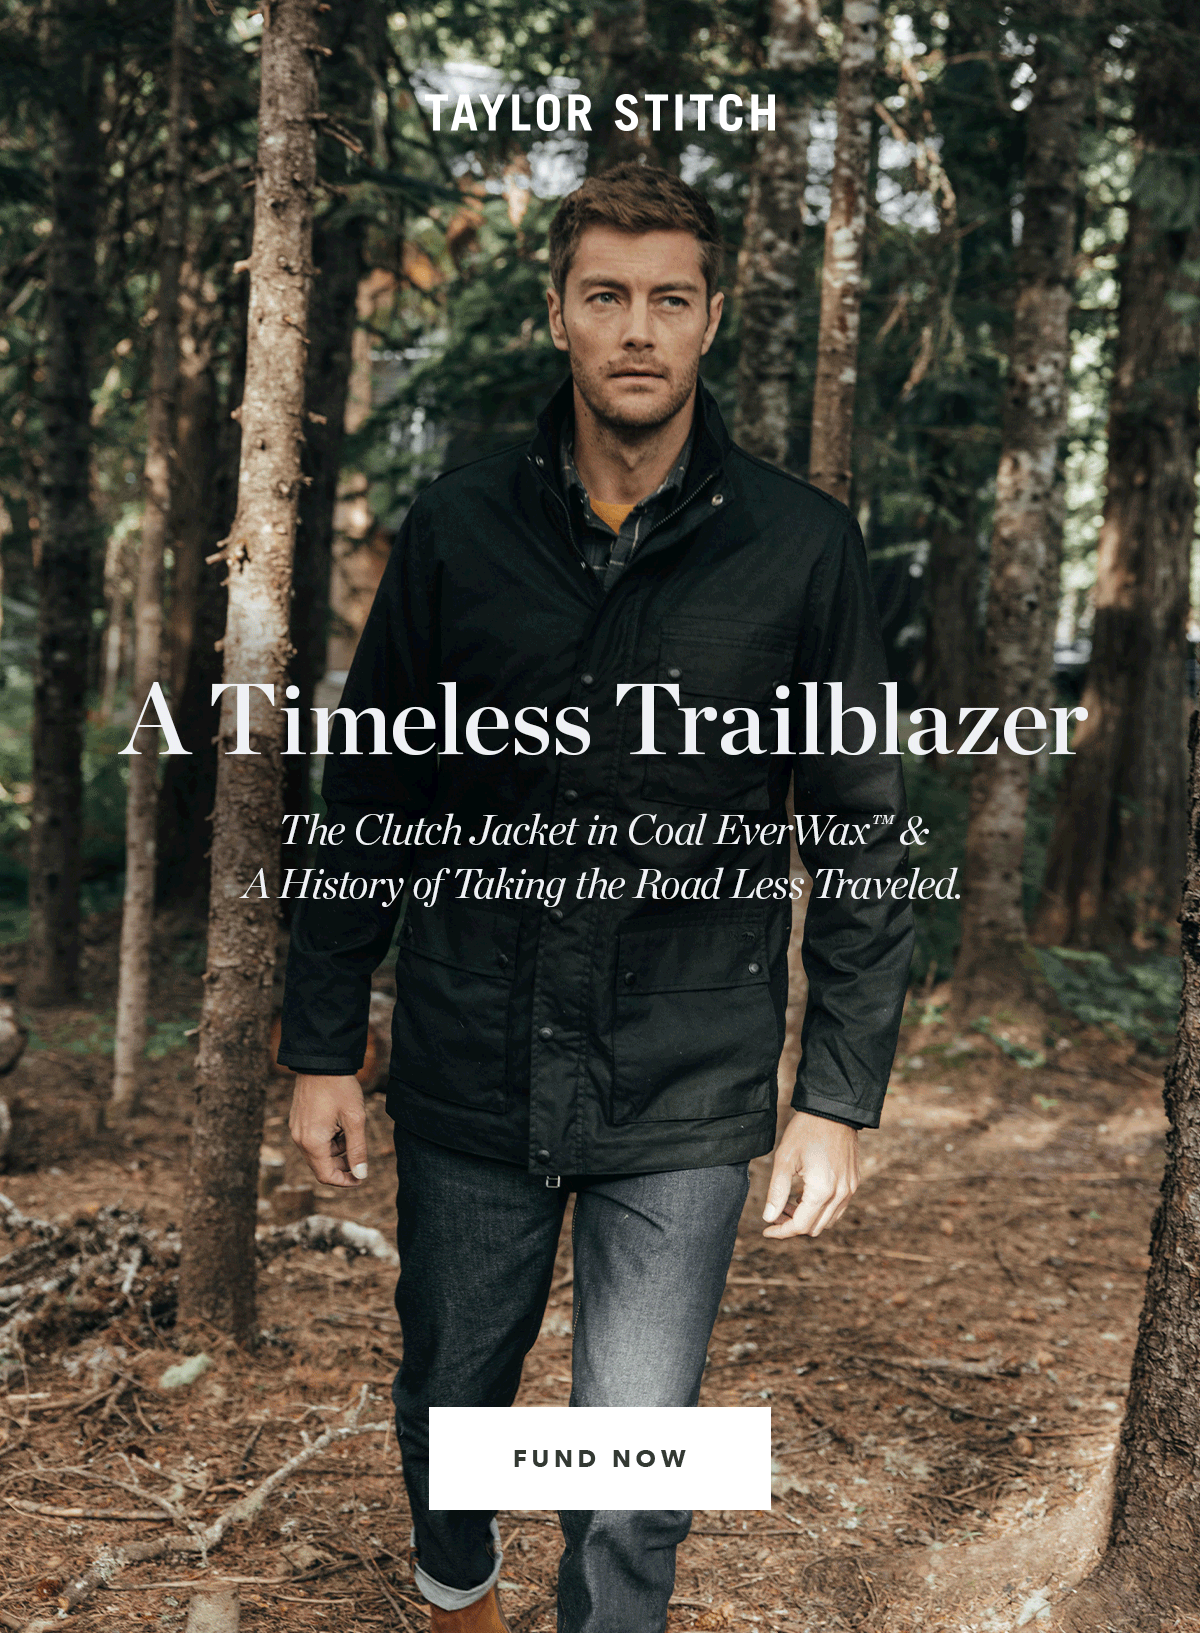 A Timeless Trailblazer: The Clutch Jacket in Coal Everwax™ & A History of Taking the Road Less Traveled.